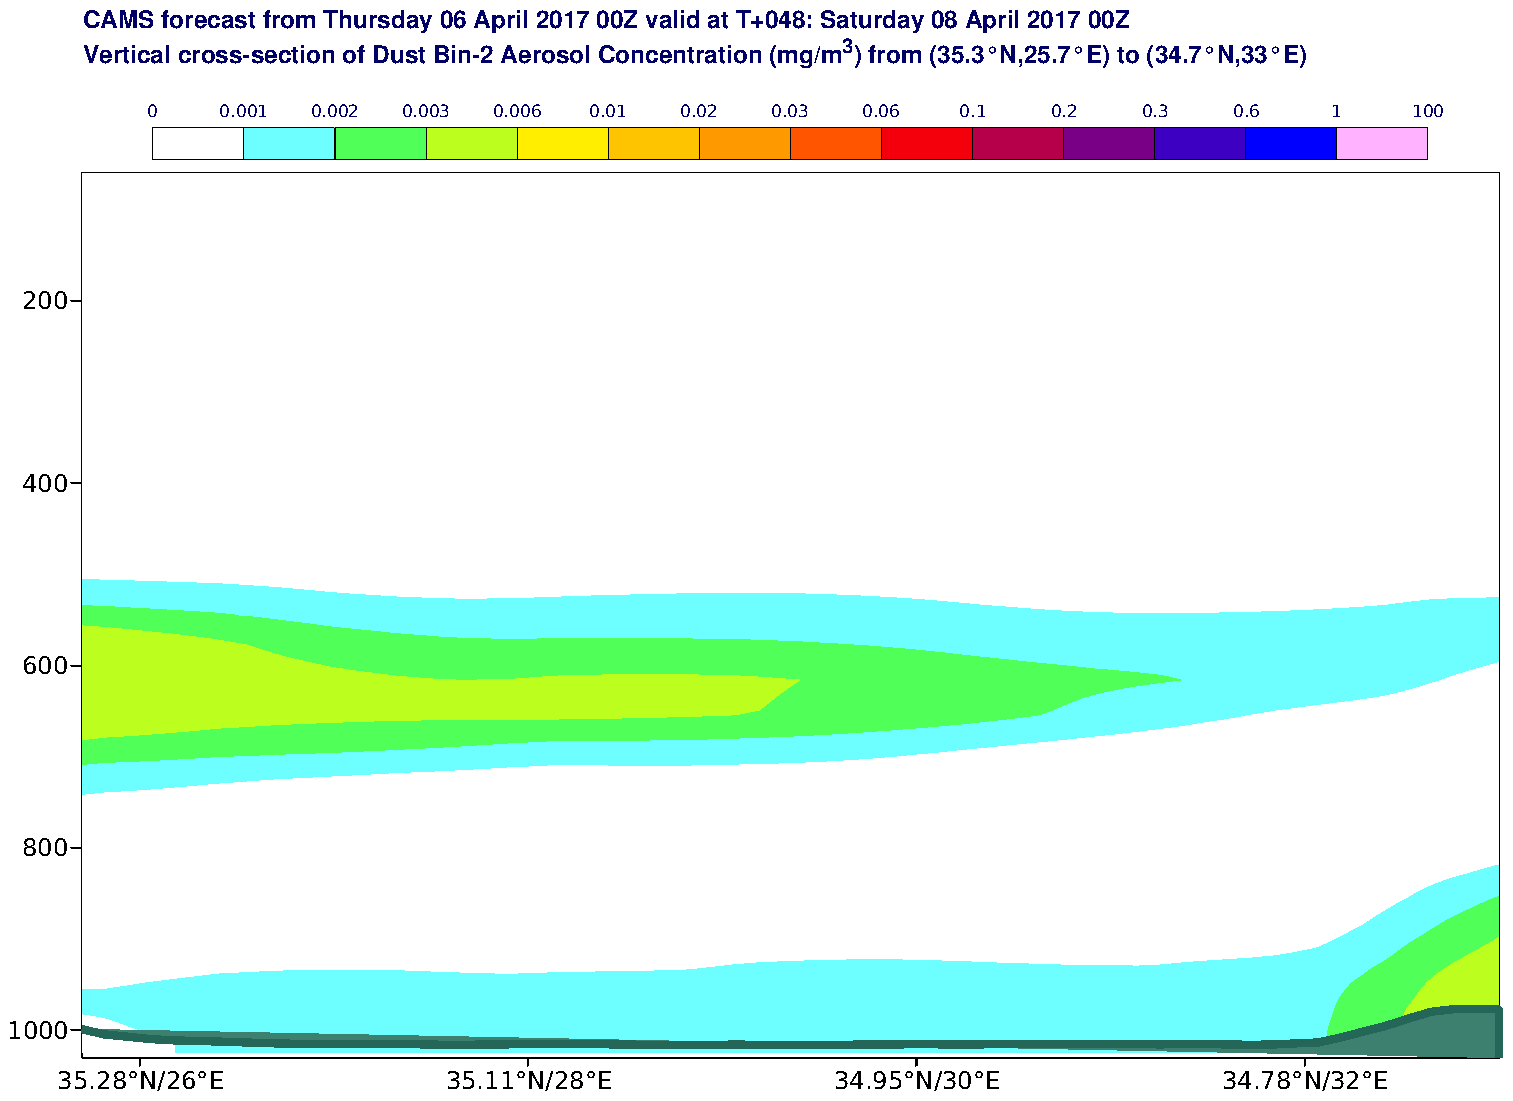 Vertical cross-section of Dust Bin-2 Aerosol Concentration (mg/m3) valid at T48 - 2017-04-08 00:00